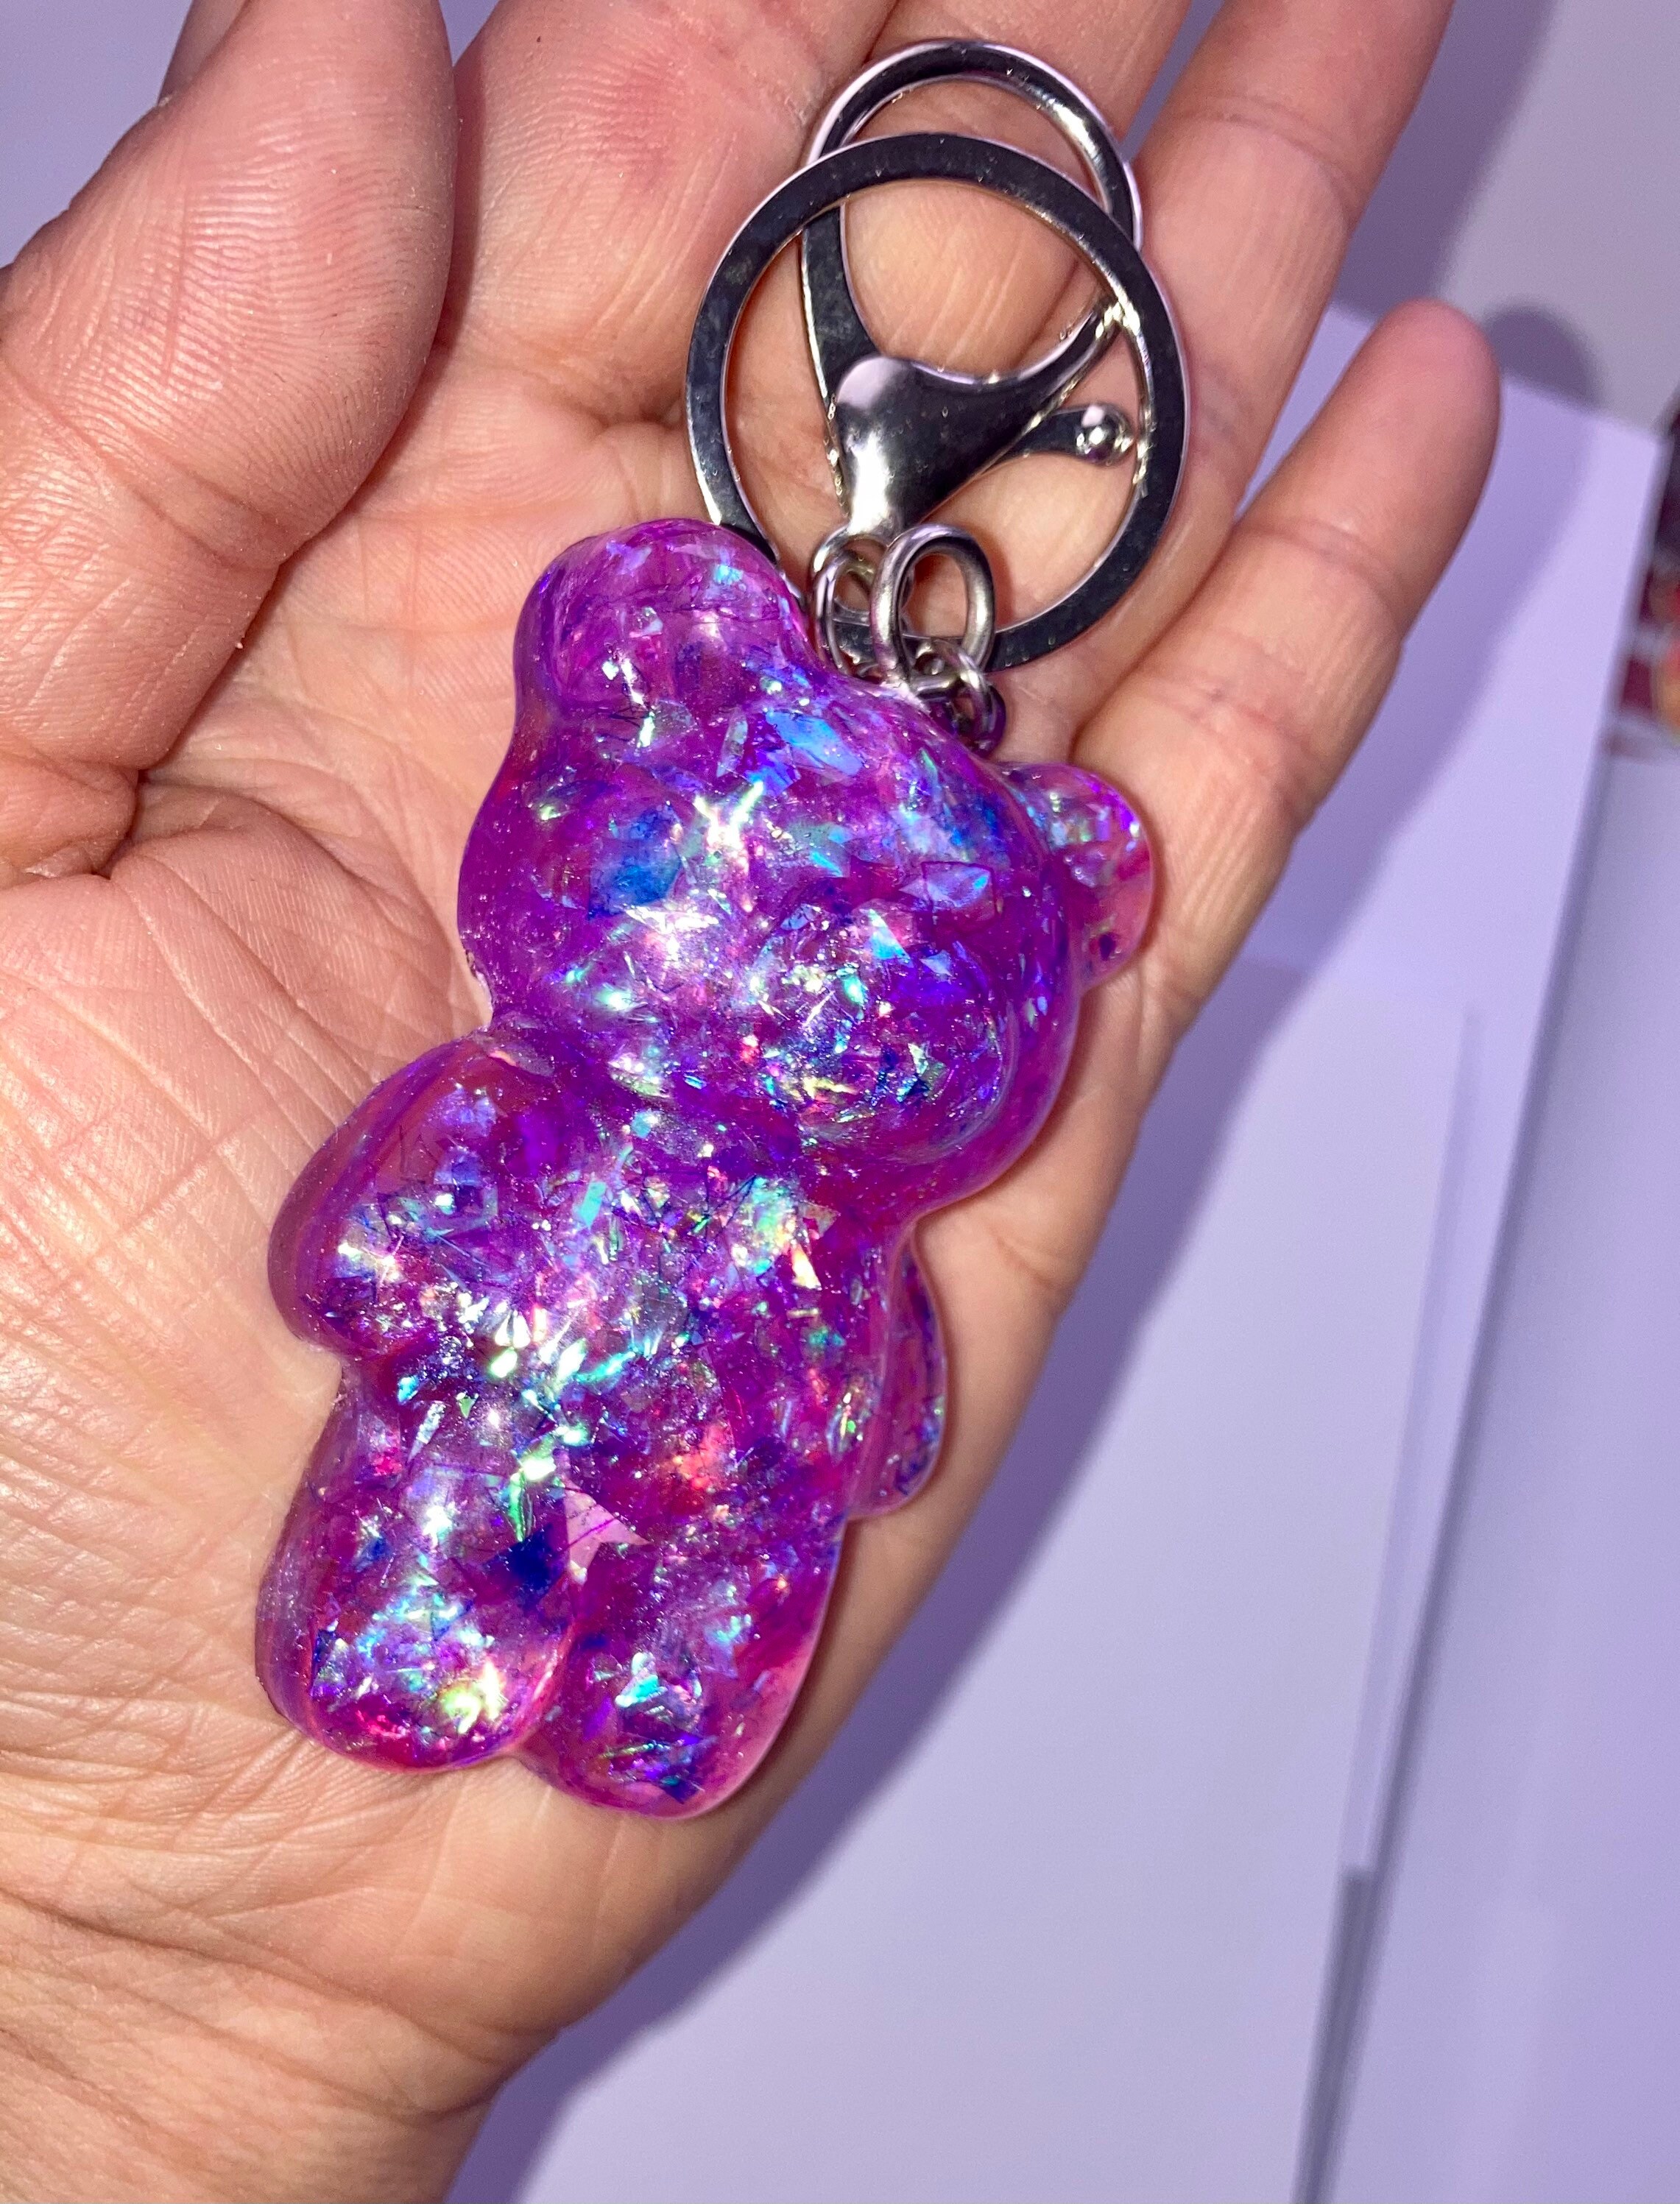 Purple resin teddy bear keyring with iridescent flakes | Etsy